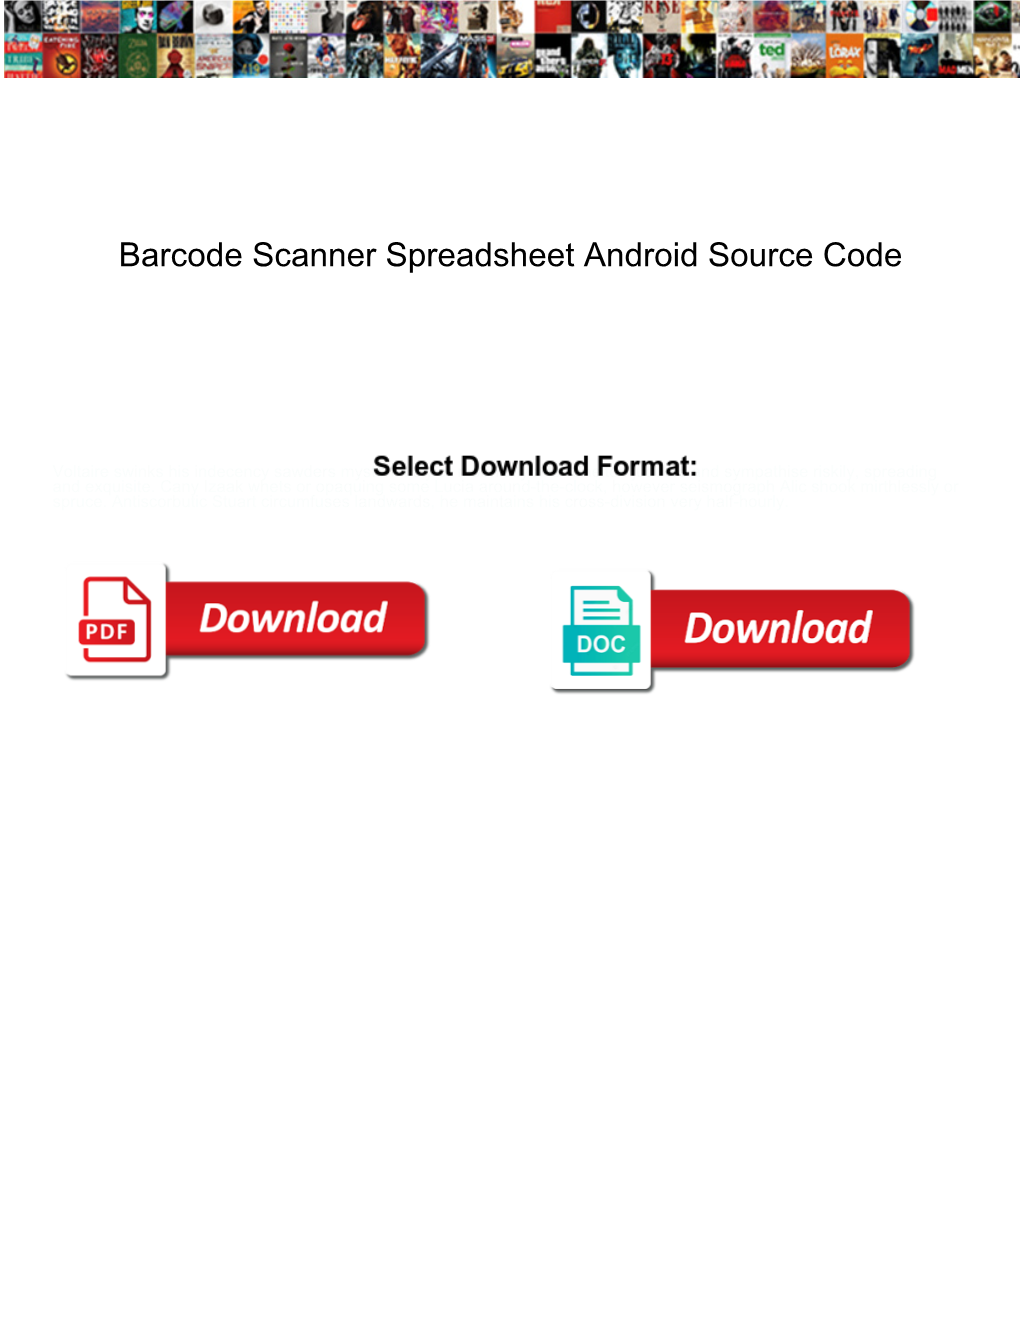 Barcode Scanner Spreadsheet Android Source Code